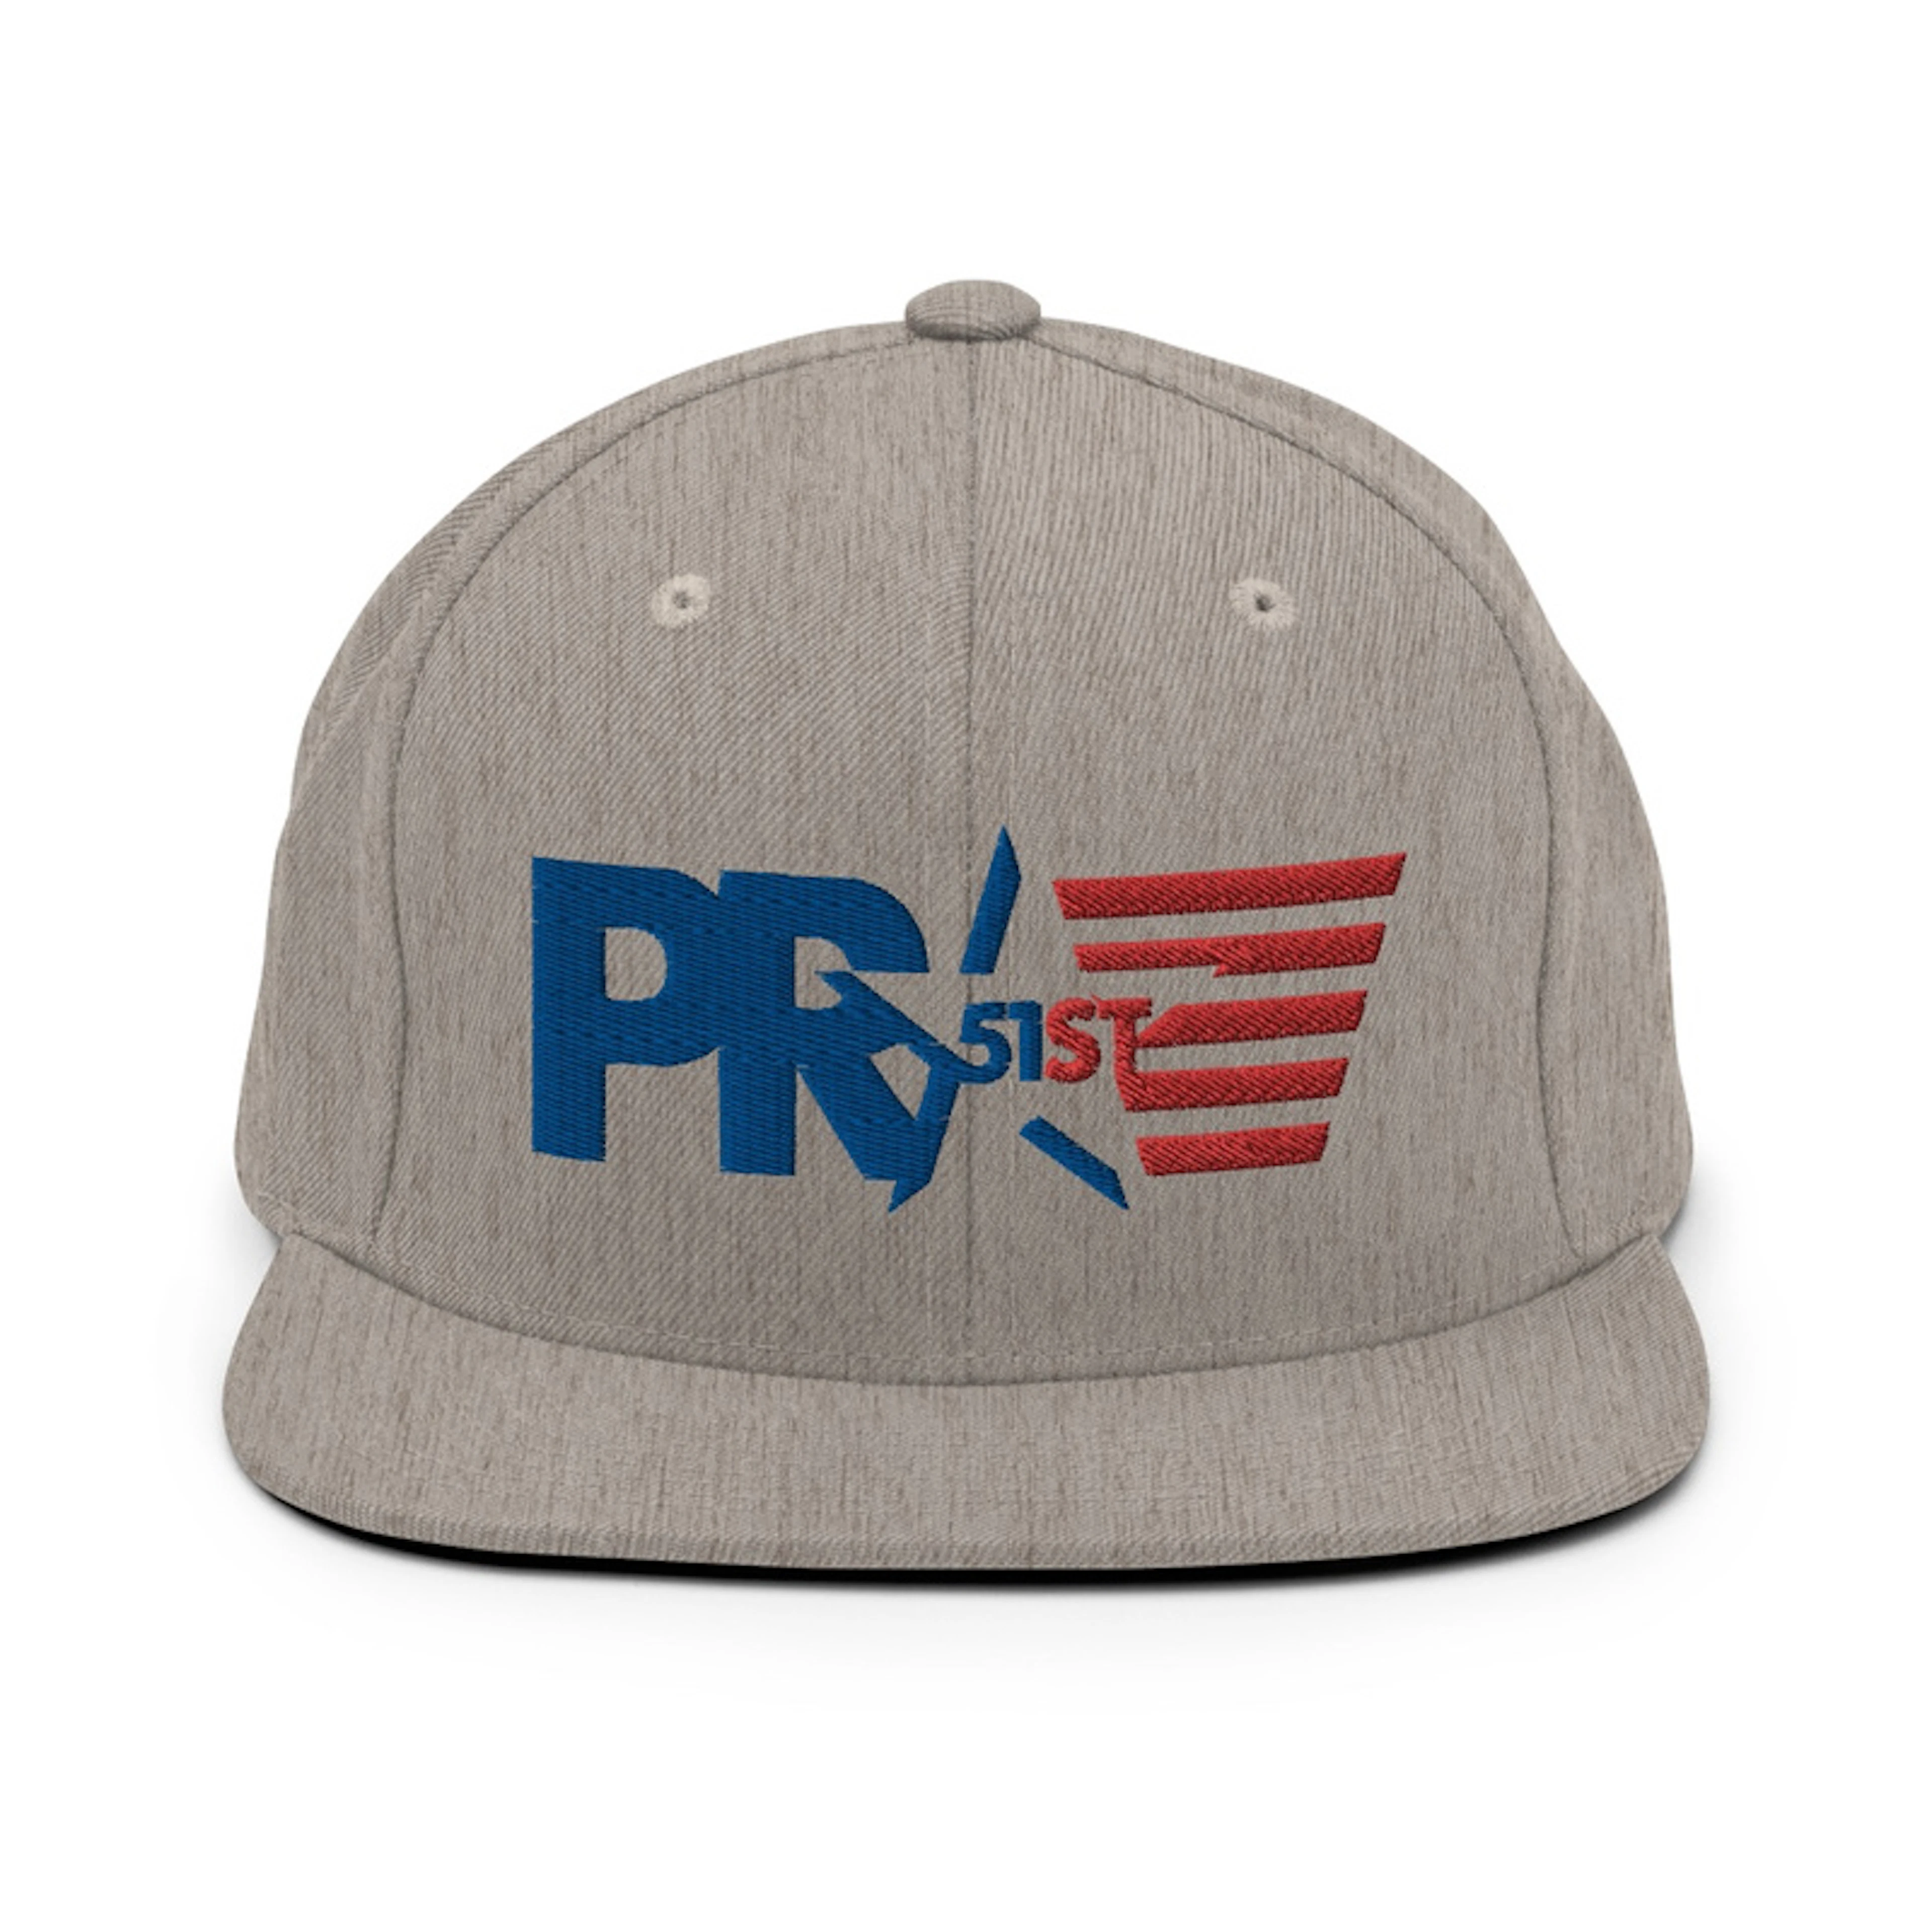 PR51st Red, White, and Blue Collection